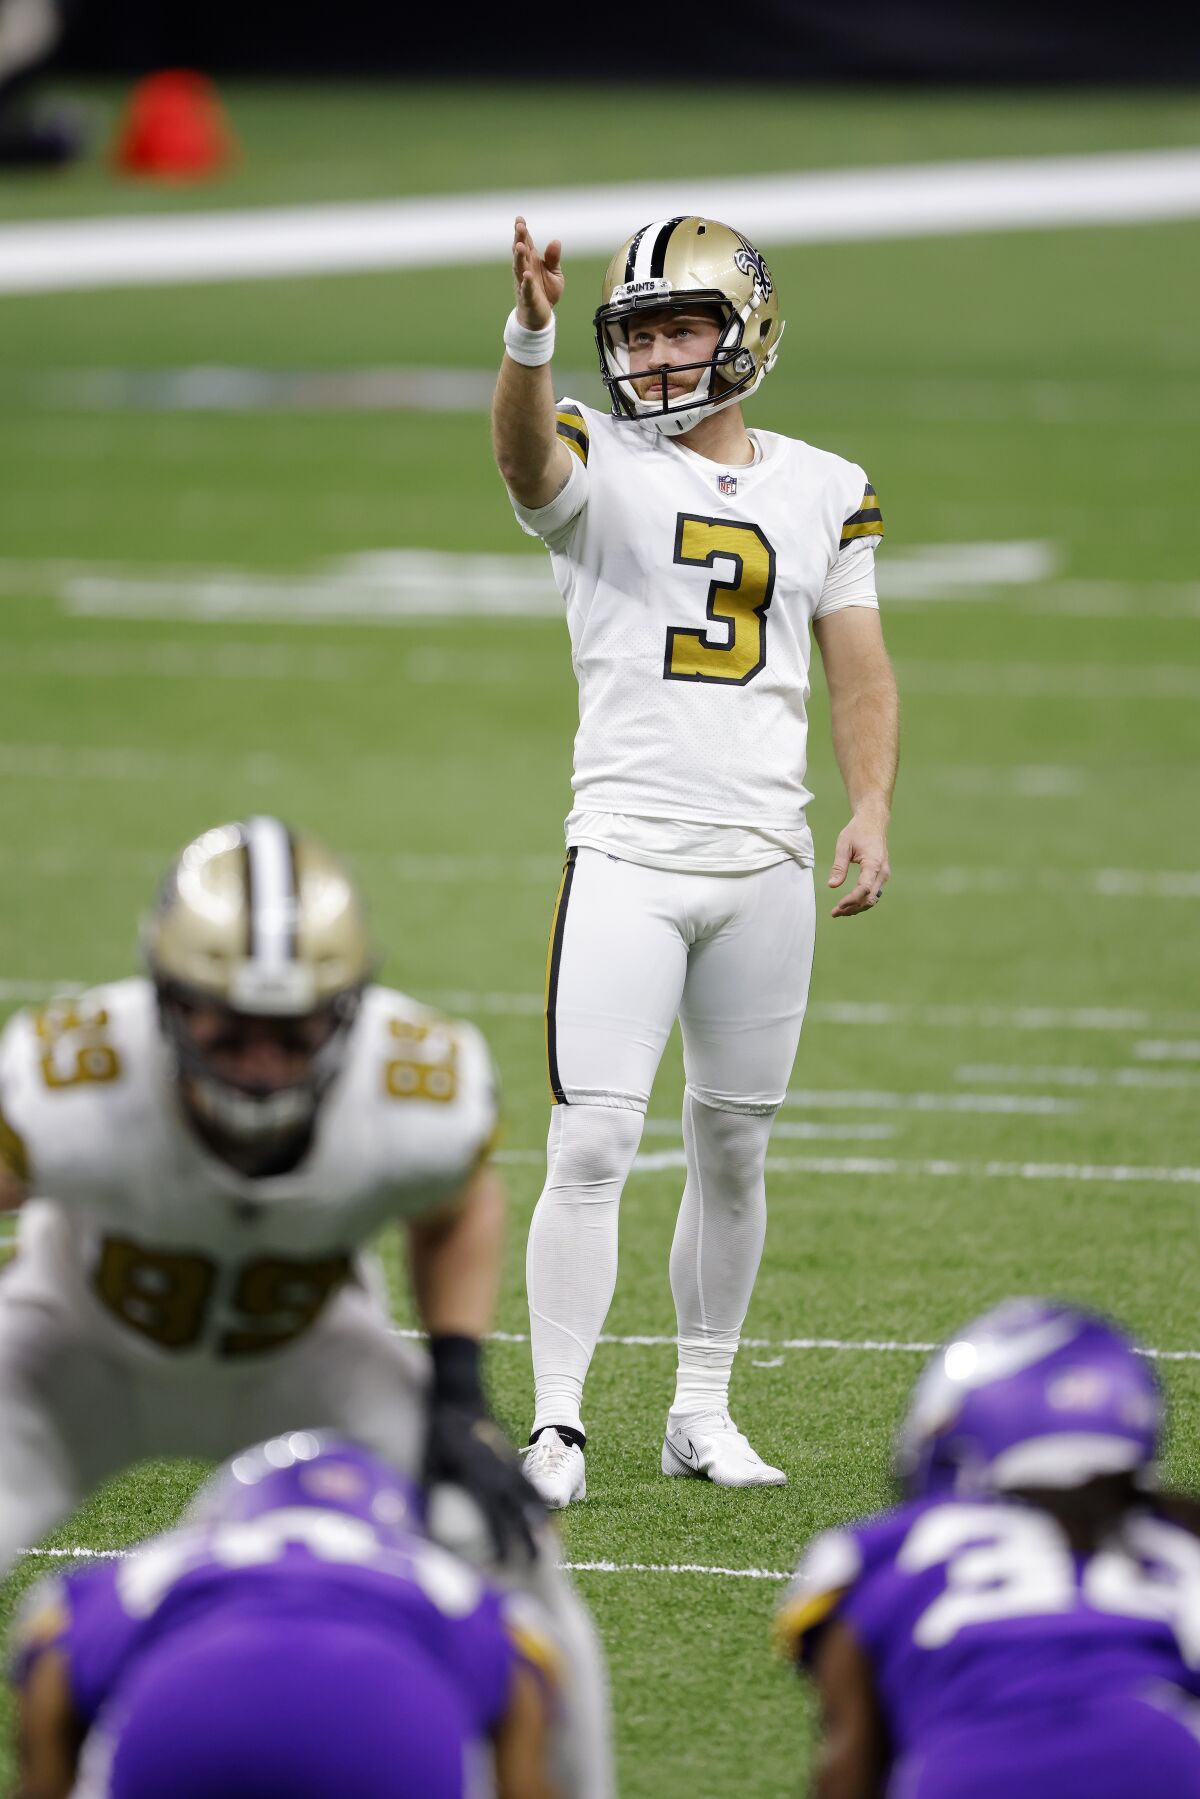 FILE - New Orleans Saints kicker Wil Lutz (3) is shown during an NFL football game against the Minnesota Vikings in New Orleans, in this Friday, Dec. 25, 2020, file photo. Lutz has scheduled surgery to a repair a core muscle injury and it is unclear if he'll return in time for the regular season. Lutz announced the procedure with a post on social media and Saints coach Sean Payton said the Saints would have to work out kickers and sign a new one “at least" for the preseason.Lutz, who has played in every game for New Orleans since making the team as an undrafted rookie out of Georgia State in 2016, was the only kicker on the roster heading into Monday's, Aug. 9, 2021, practice. (AP Photo/Tyler Kaufman, File)